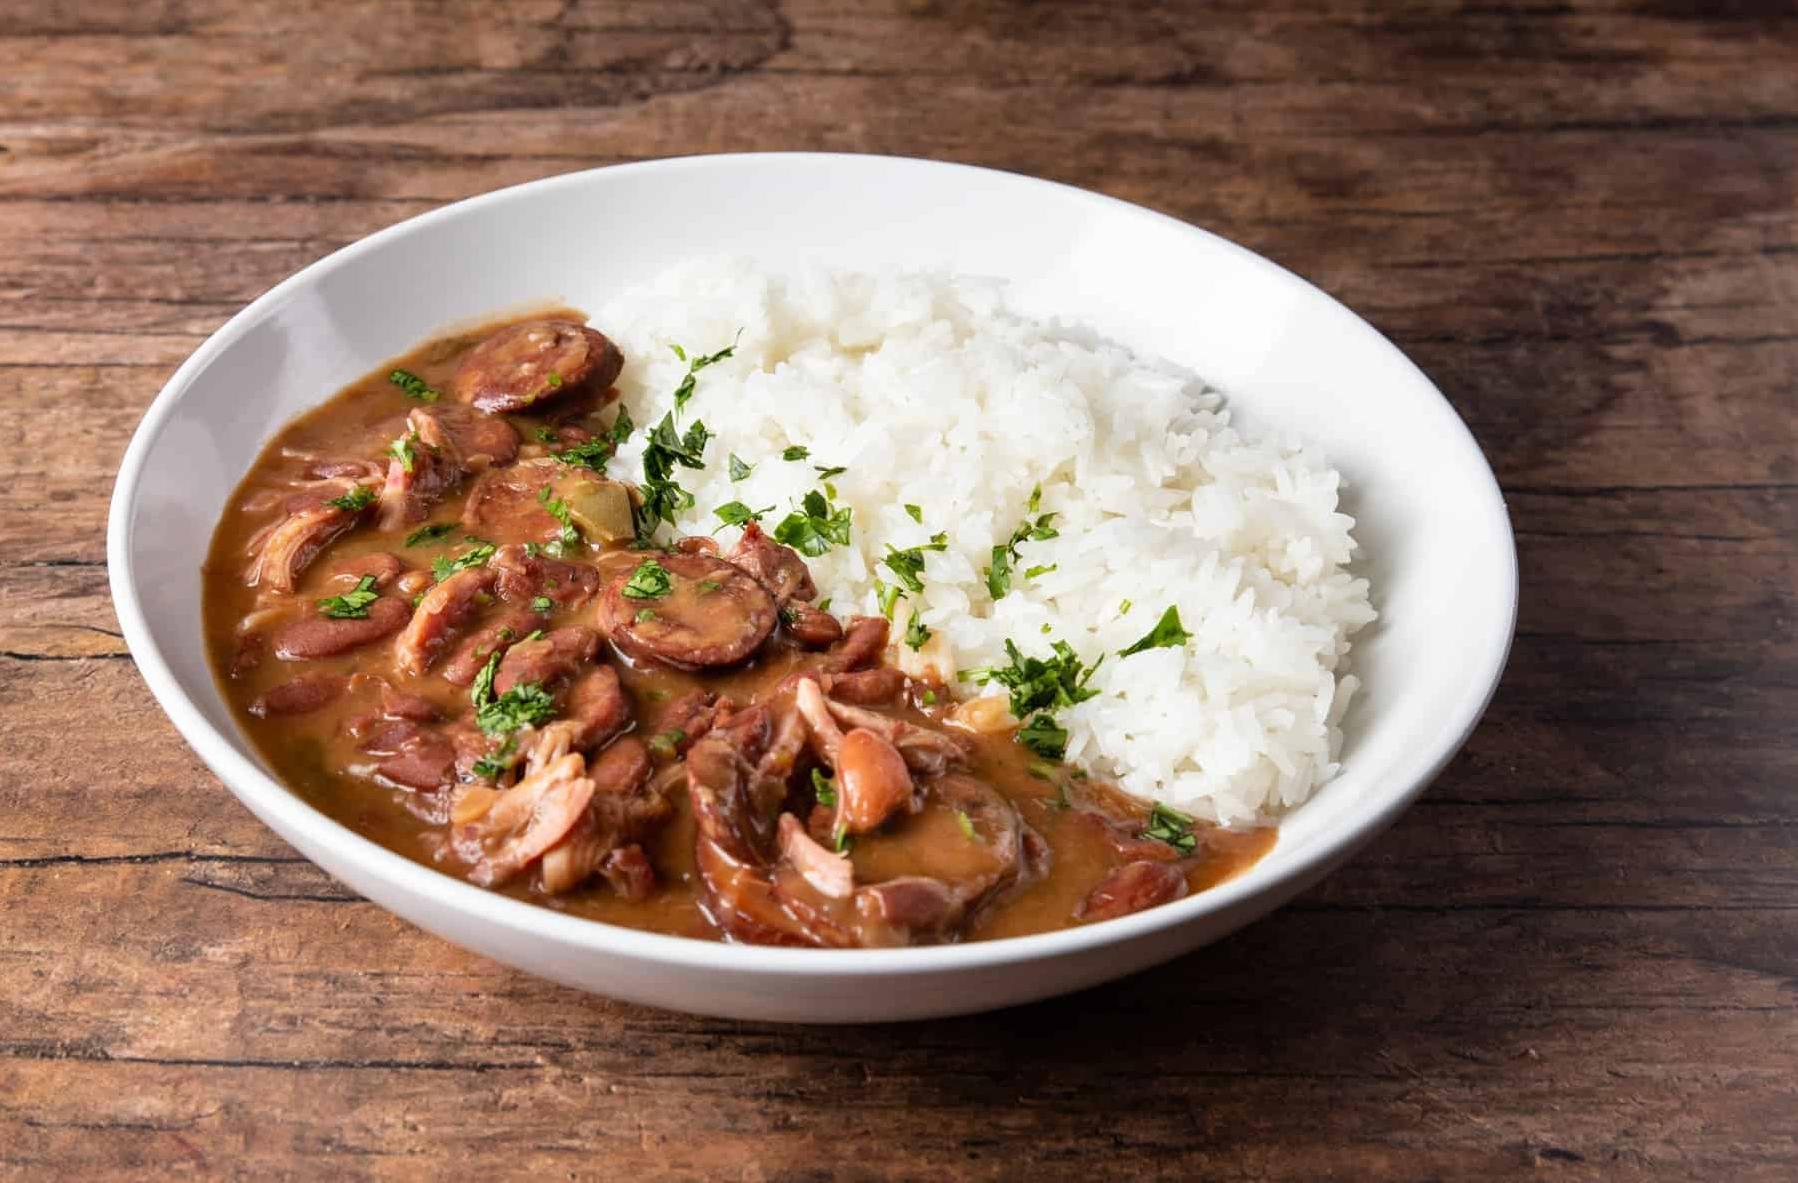  The rich and savory aroma of these red beans and rice will make your mouth water.